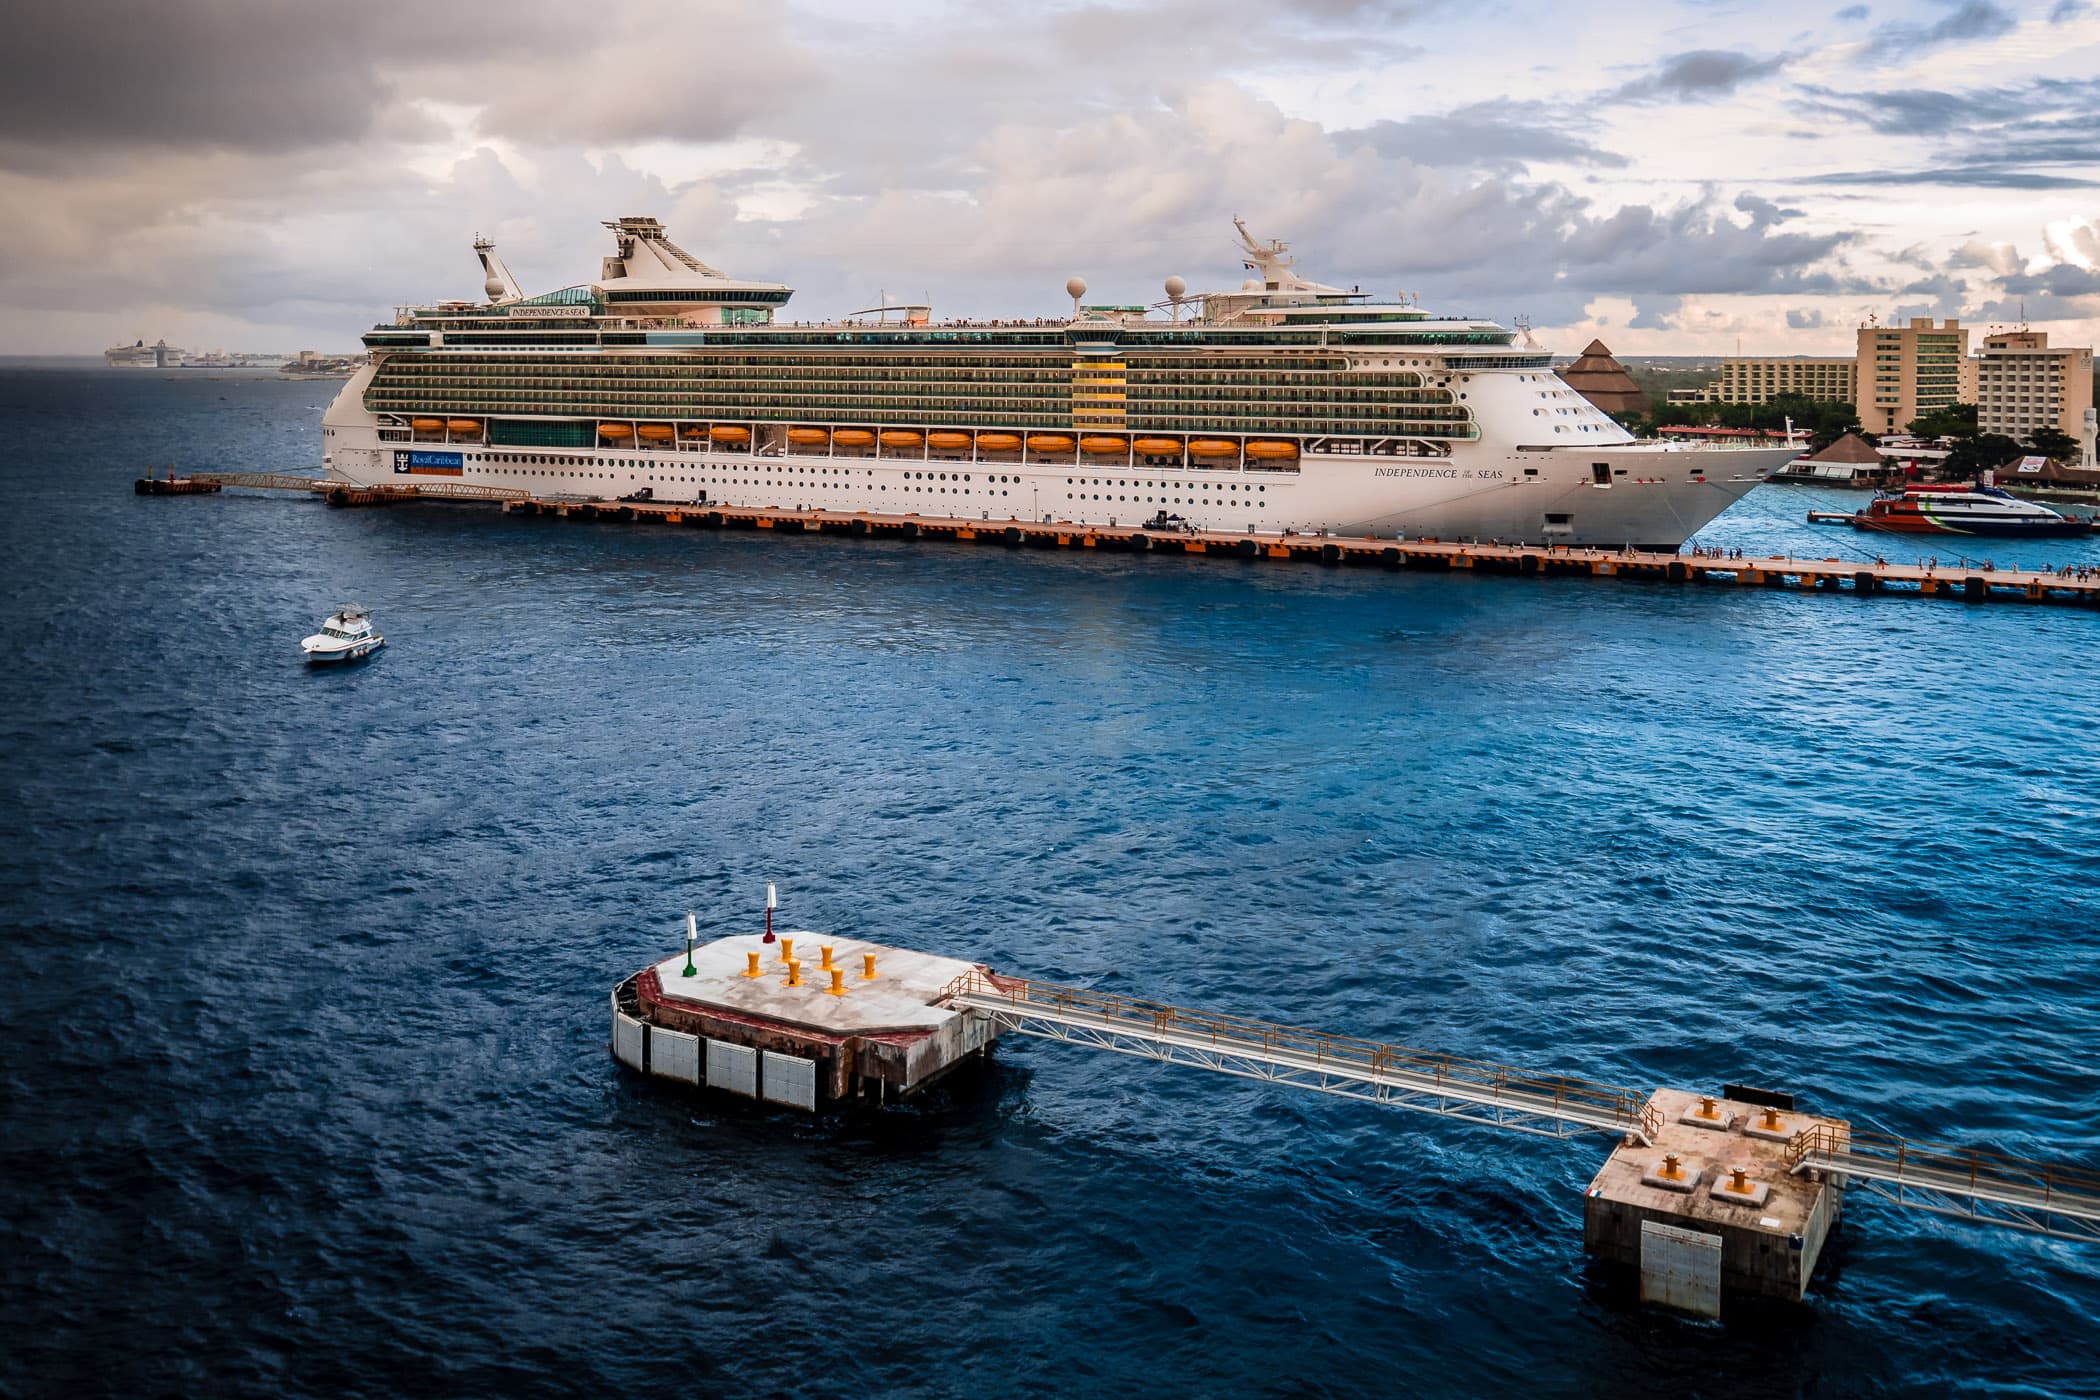 The Royal Caribbean cruise ship Independence of the Seas, docked in Cozumel, Mexico.